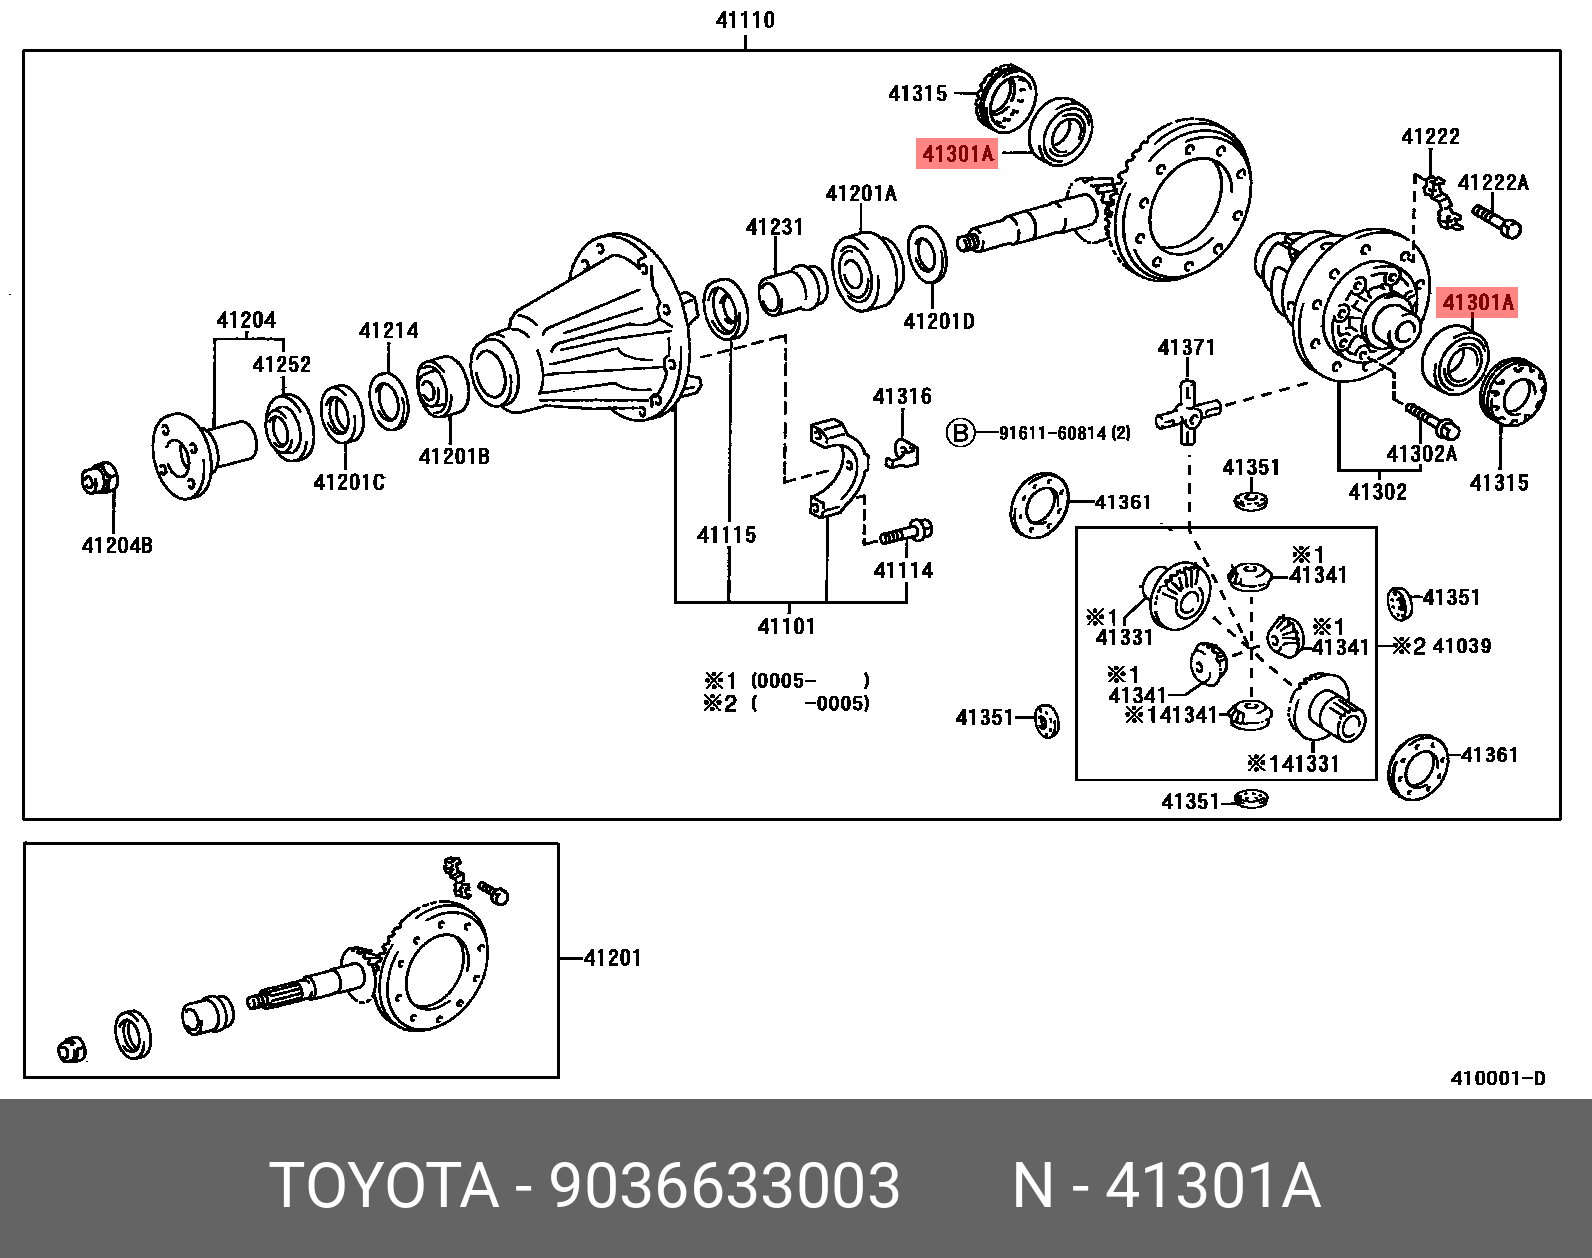 COROLLA AXIO/ FIELDER 201204 -, BEARING(FOR REAR DIFFERENTIAL CASE)